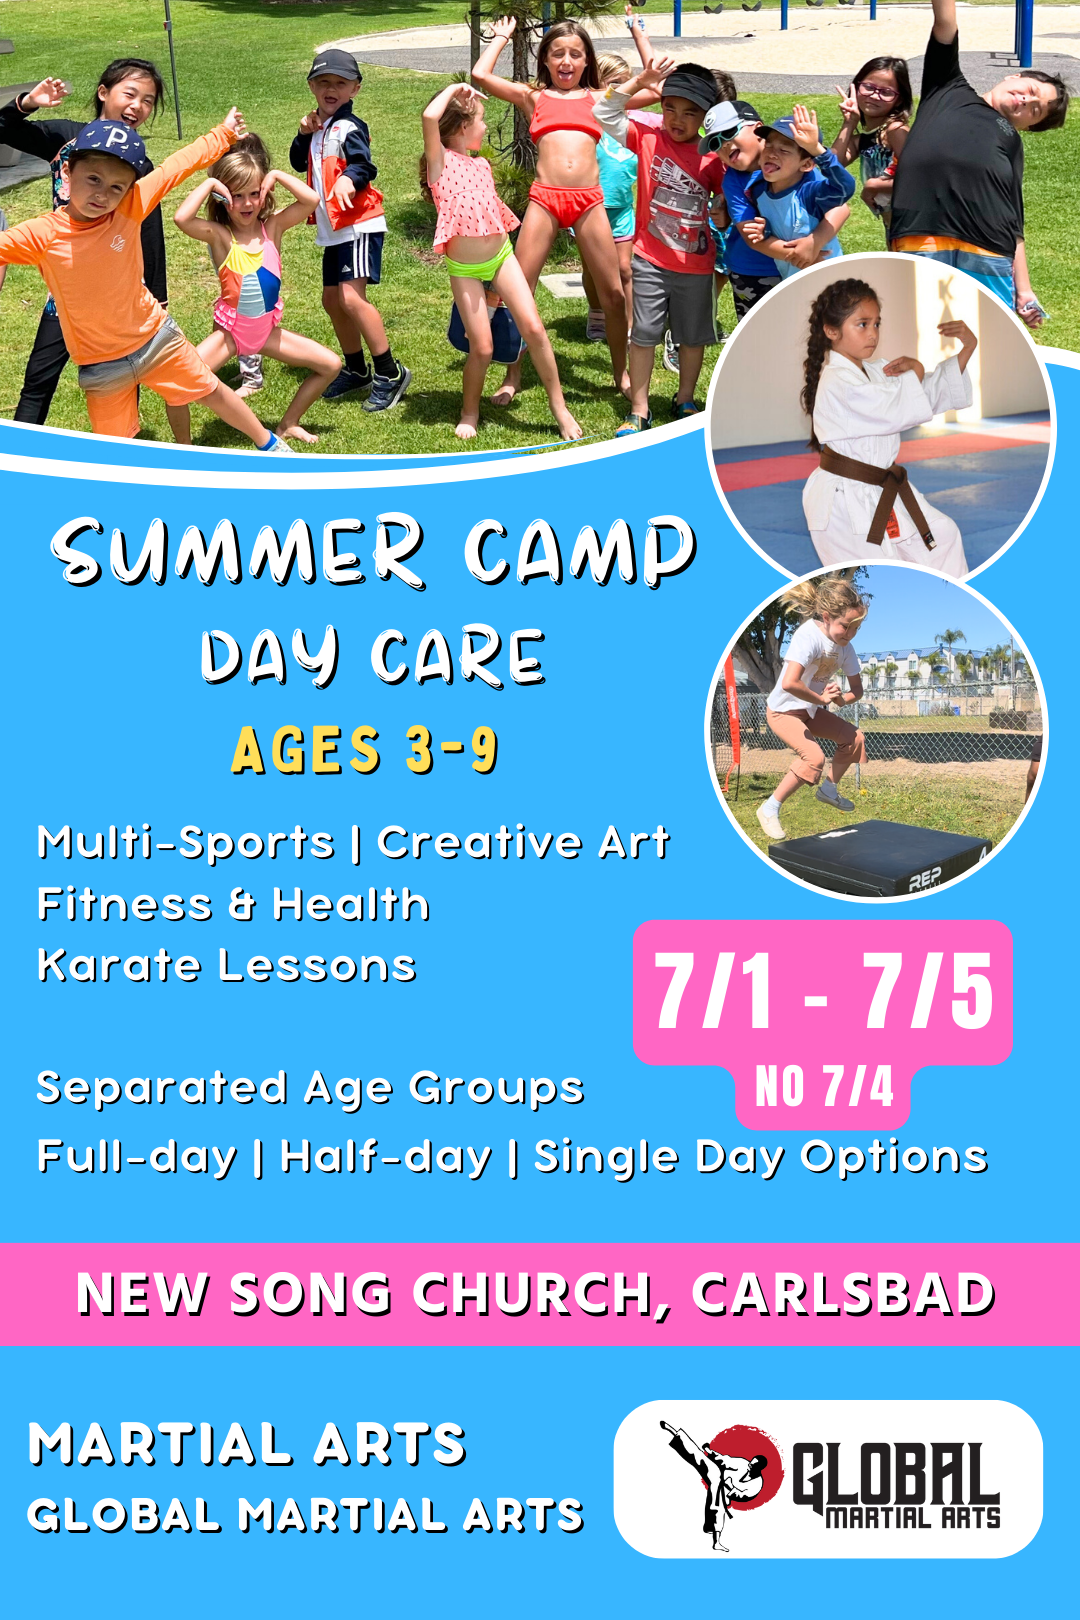 7/1 - 7/5 (NO 7/4) | Mon - Fri | 8:30 - 4:00<br>Multi-Sports, Art, and Martial Arts<br>New Song Church, Carlsbad<br>Ages 3-9 | Separated Age Groups